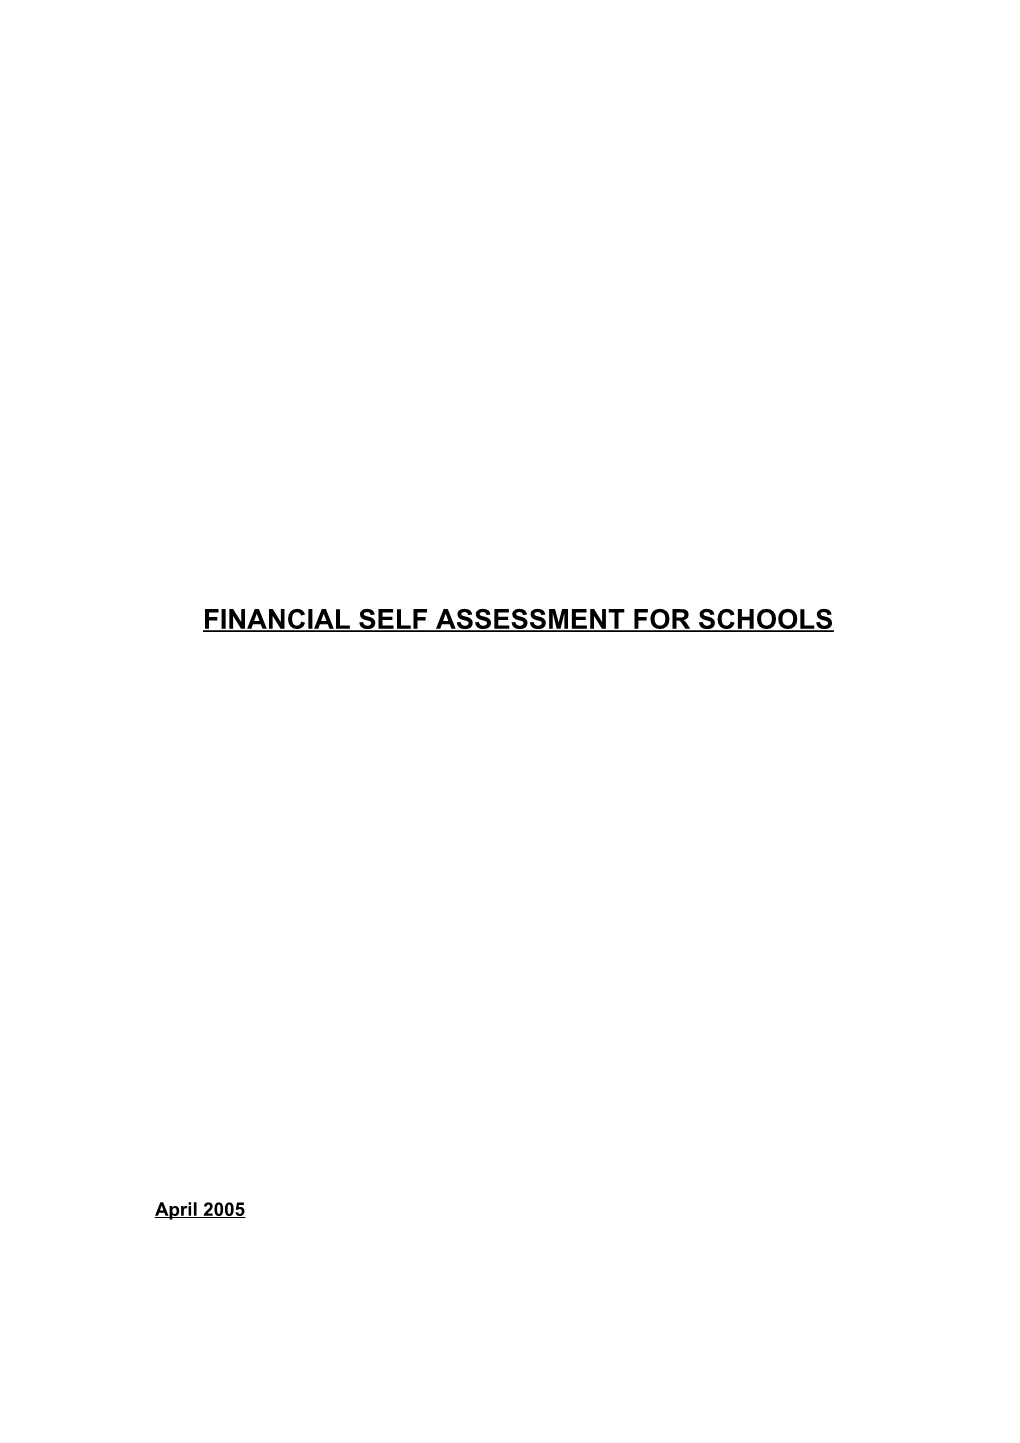 Financial Self Assessment Document for Schools